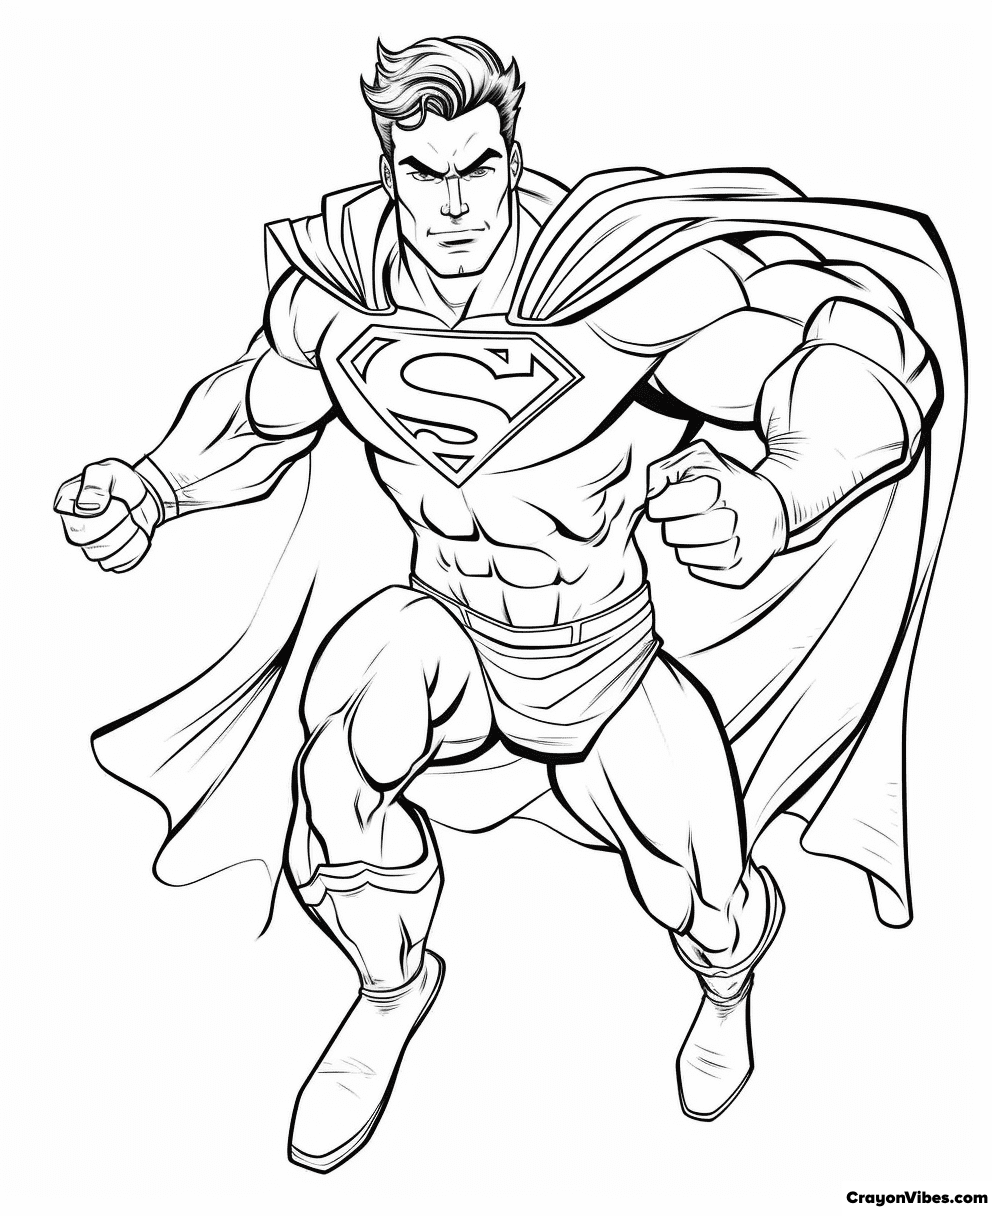 Superman Coloring Pages Free Printable for Kids & Adults